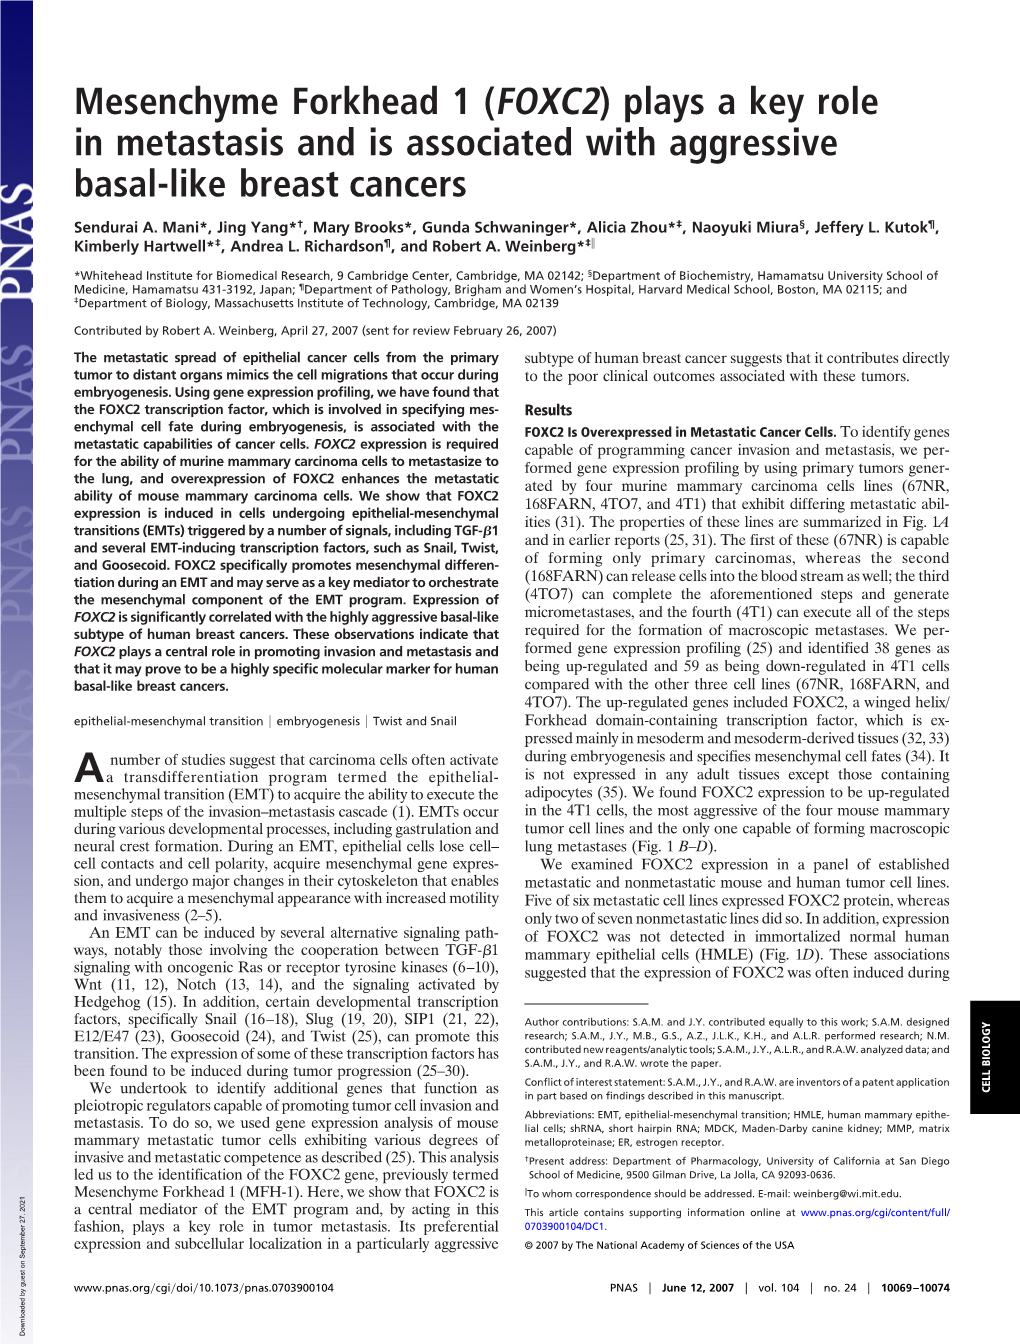 Mesenchyme Forkhead 1 (FOXC2) Plays a Key Role in Metastasis and Is Associated with Aggressive Basal-Like Breast Cancers